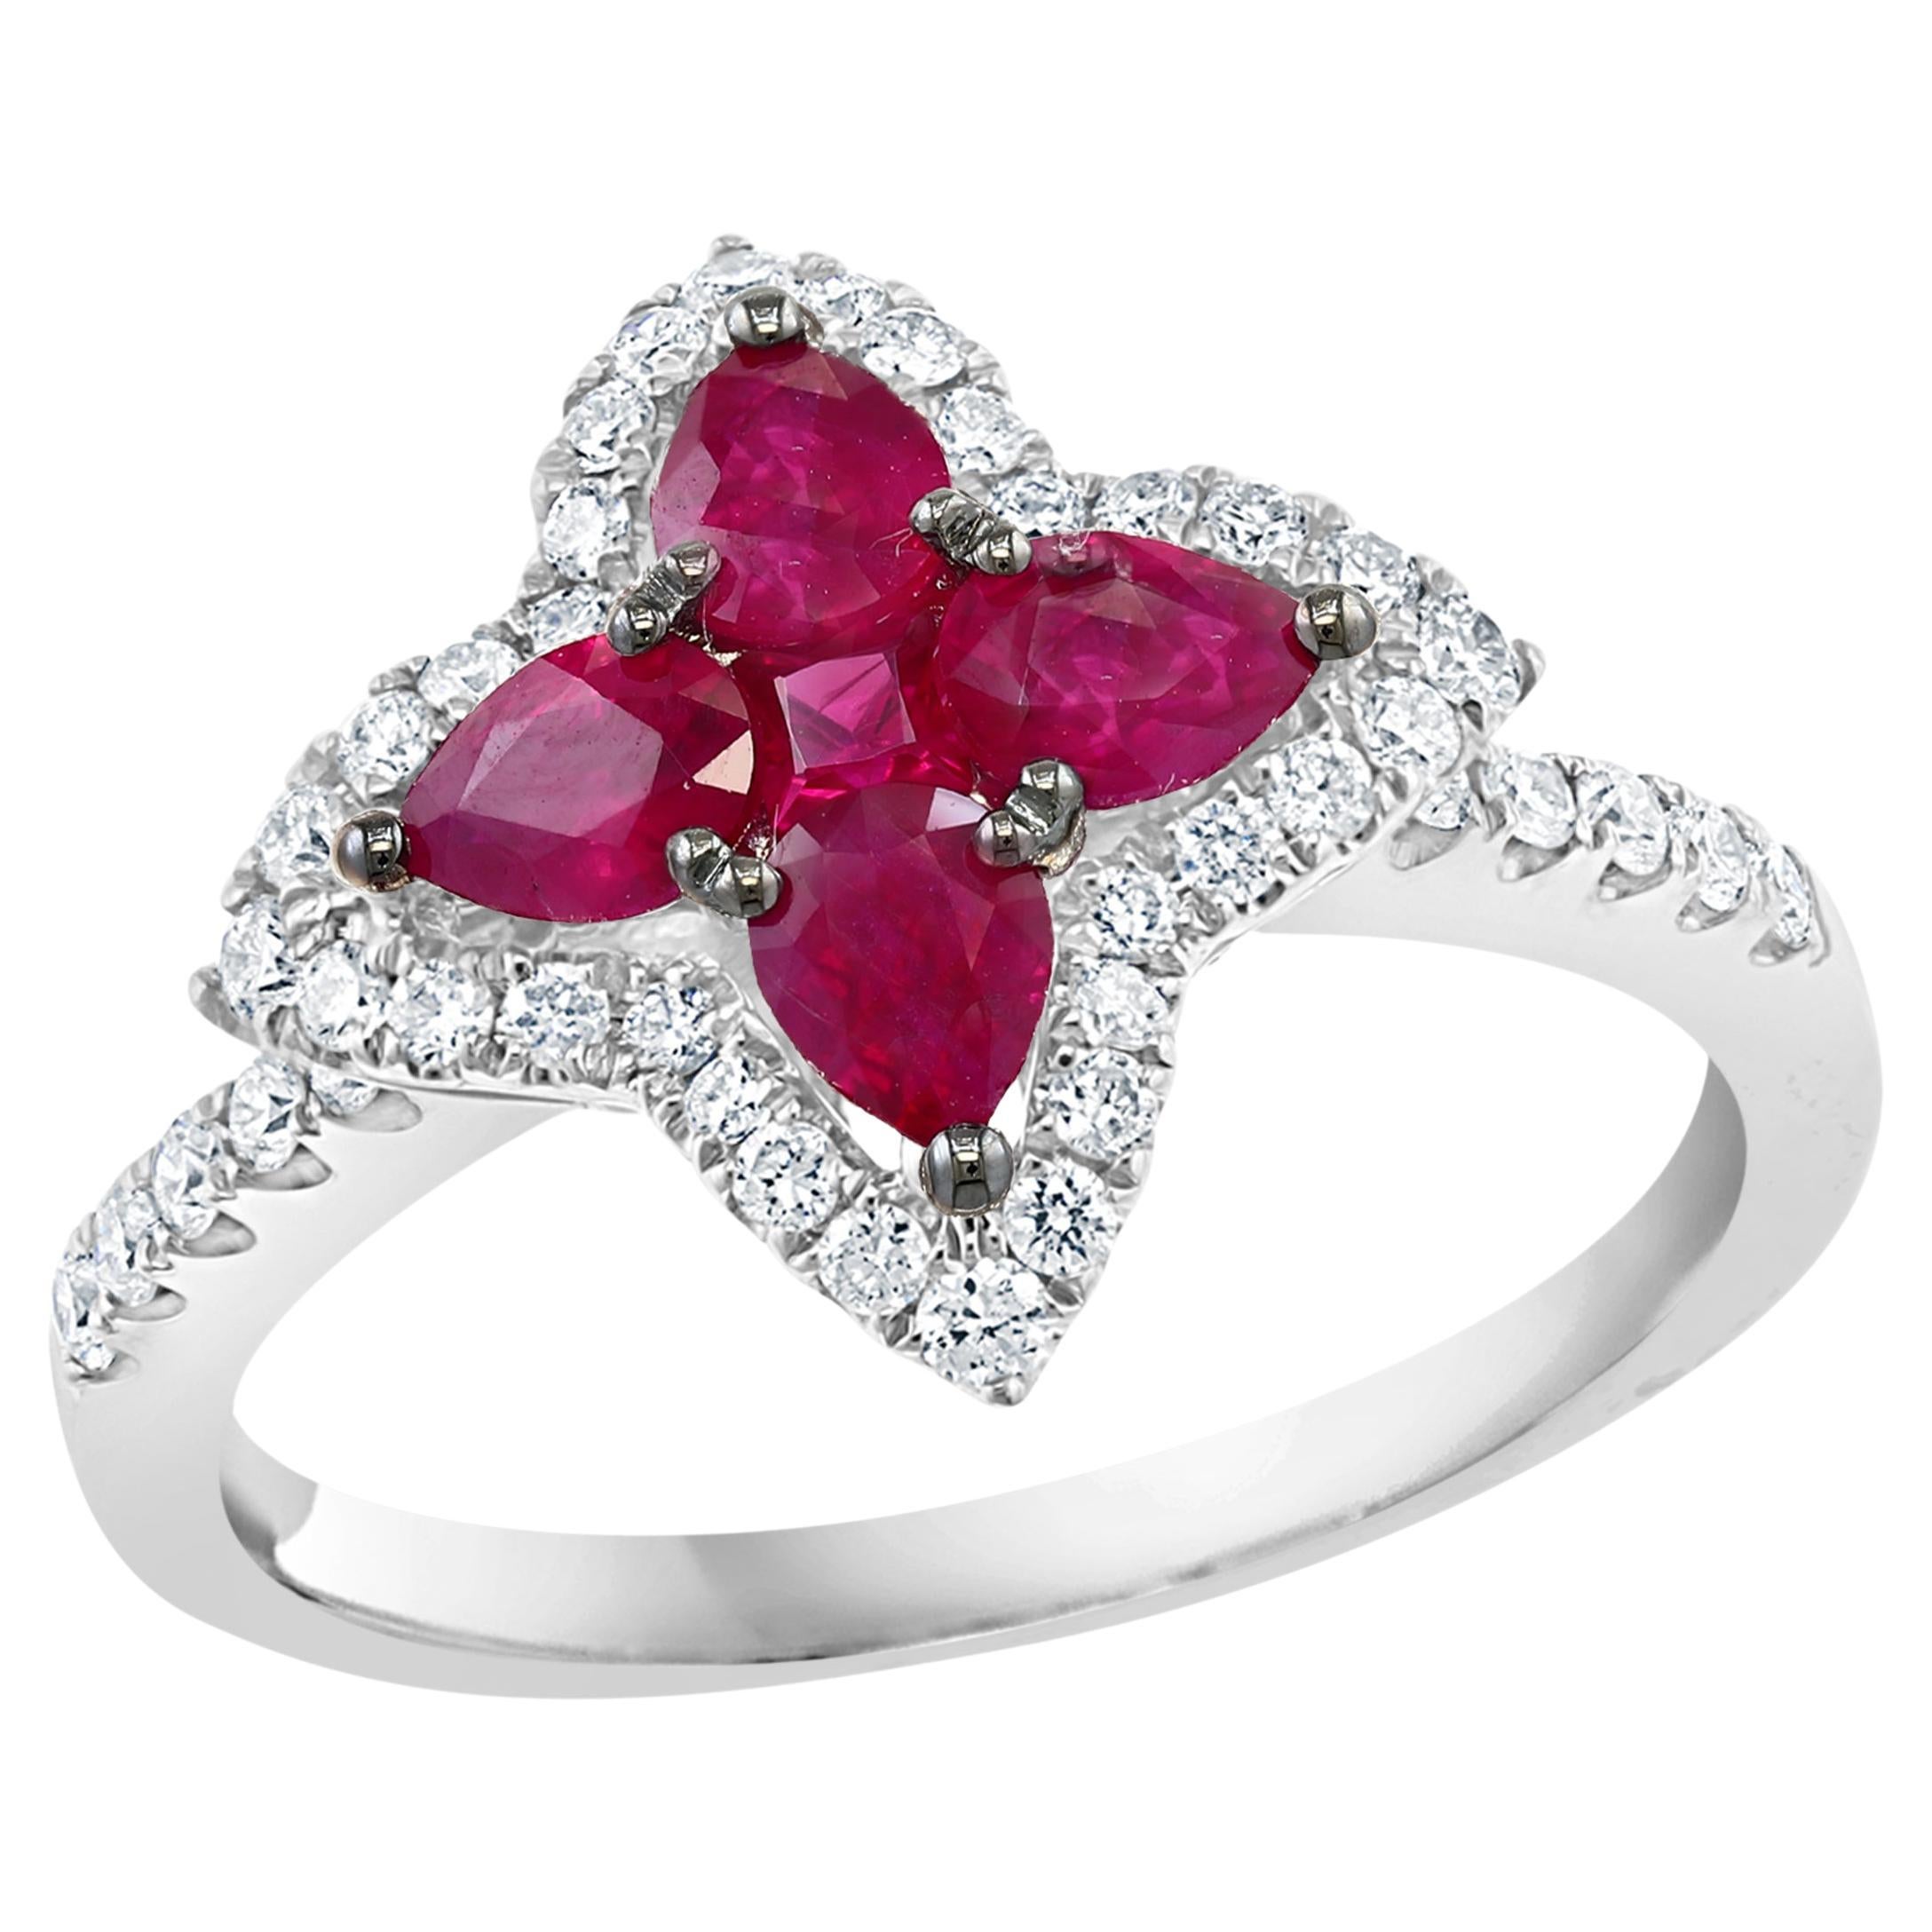 0.70 Carat Pear Shape Ruby and Diamond Cocktail Ring in 18K White Gold For Sale